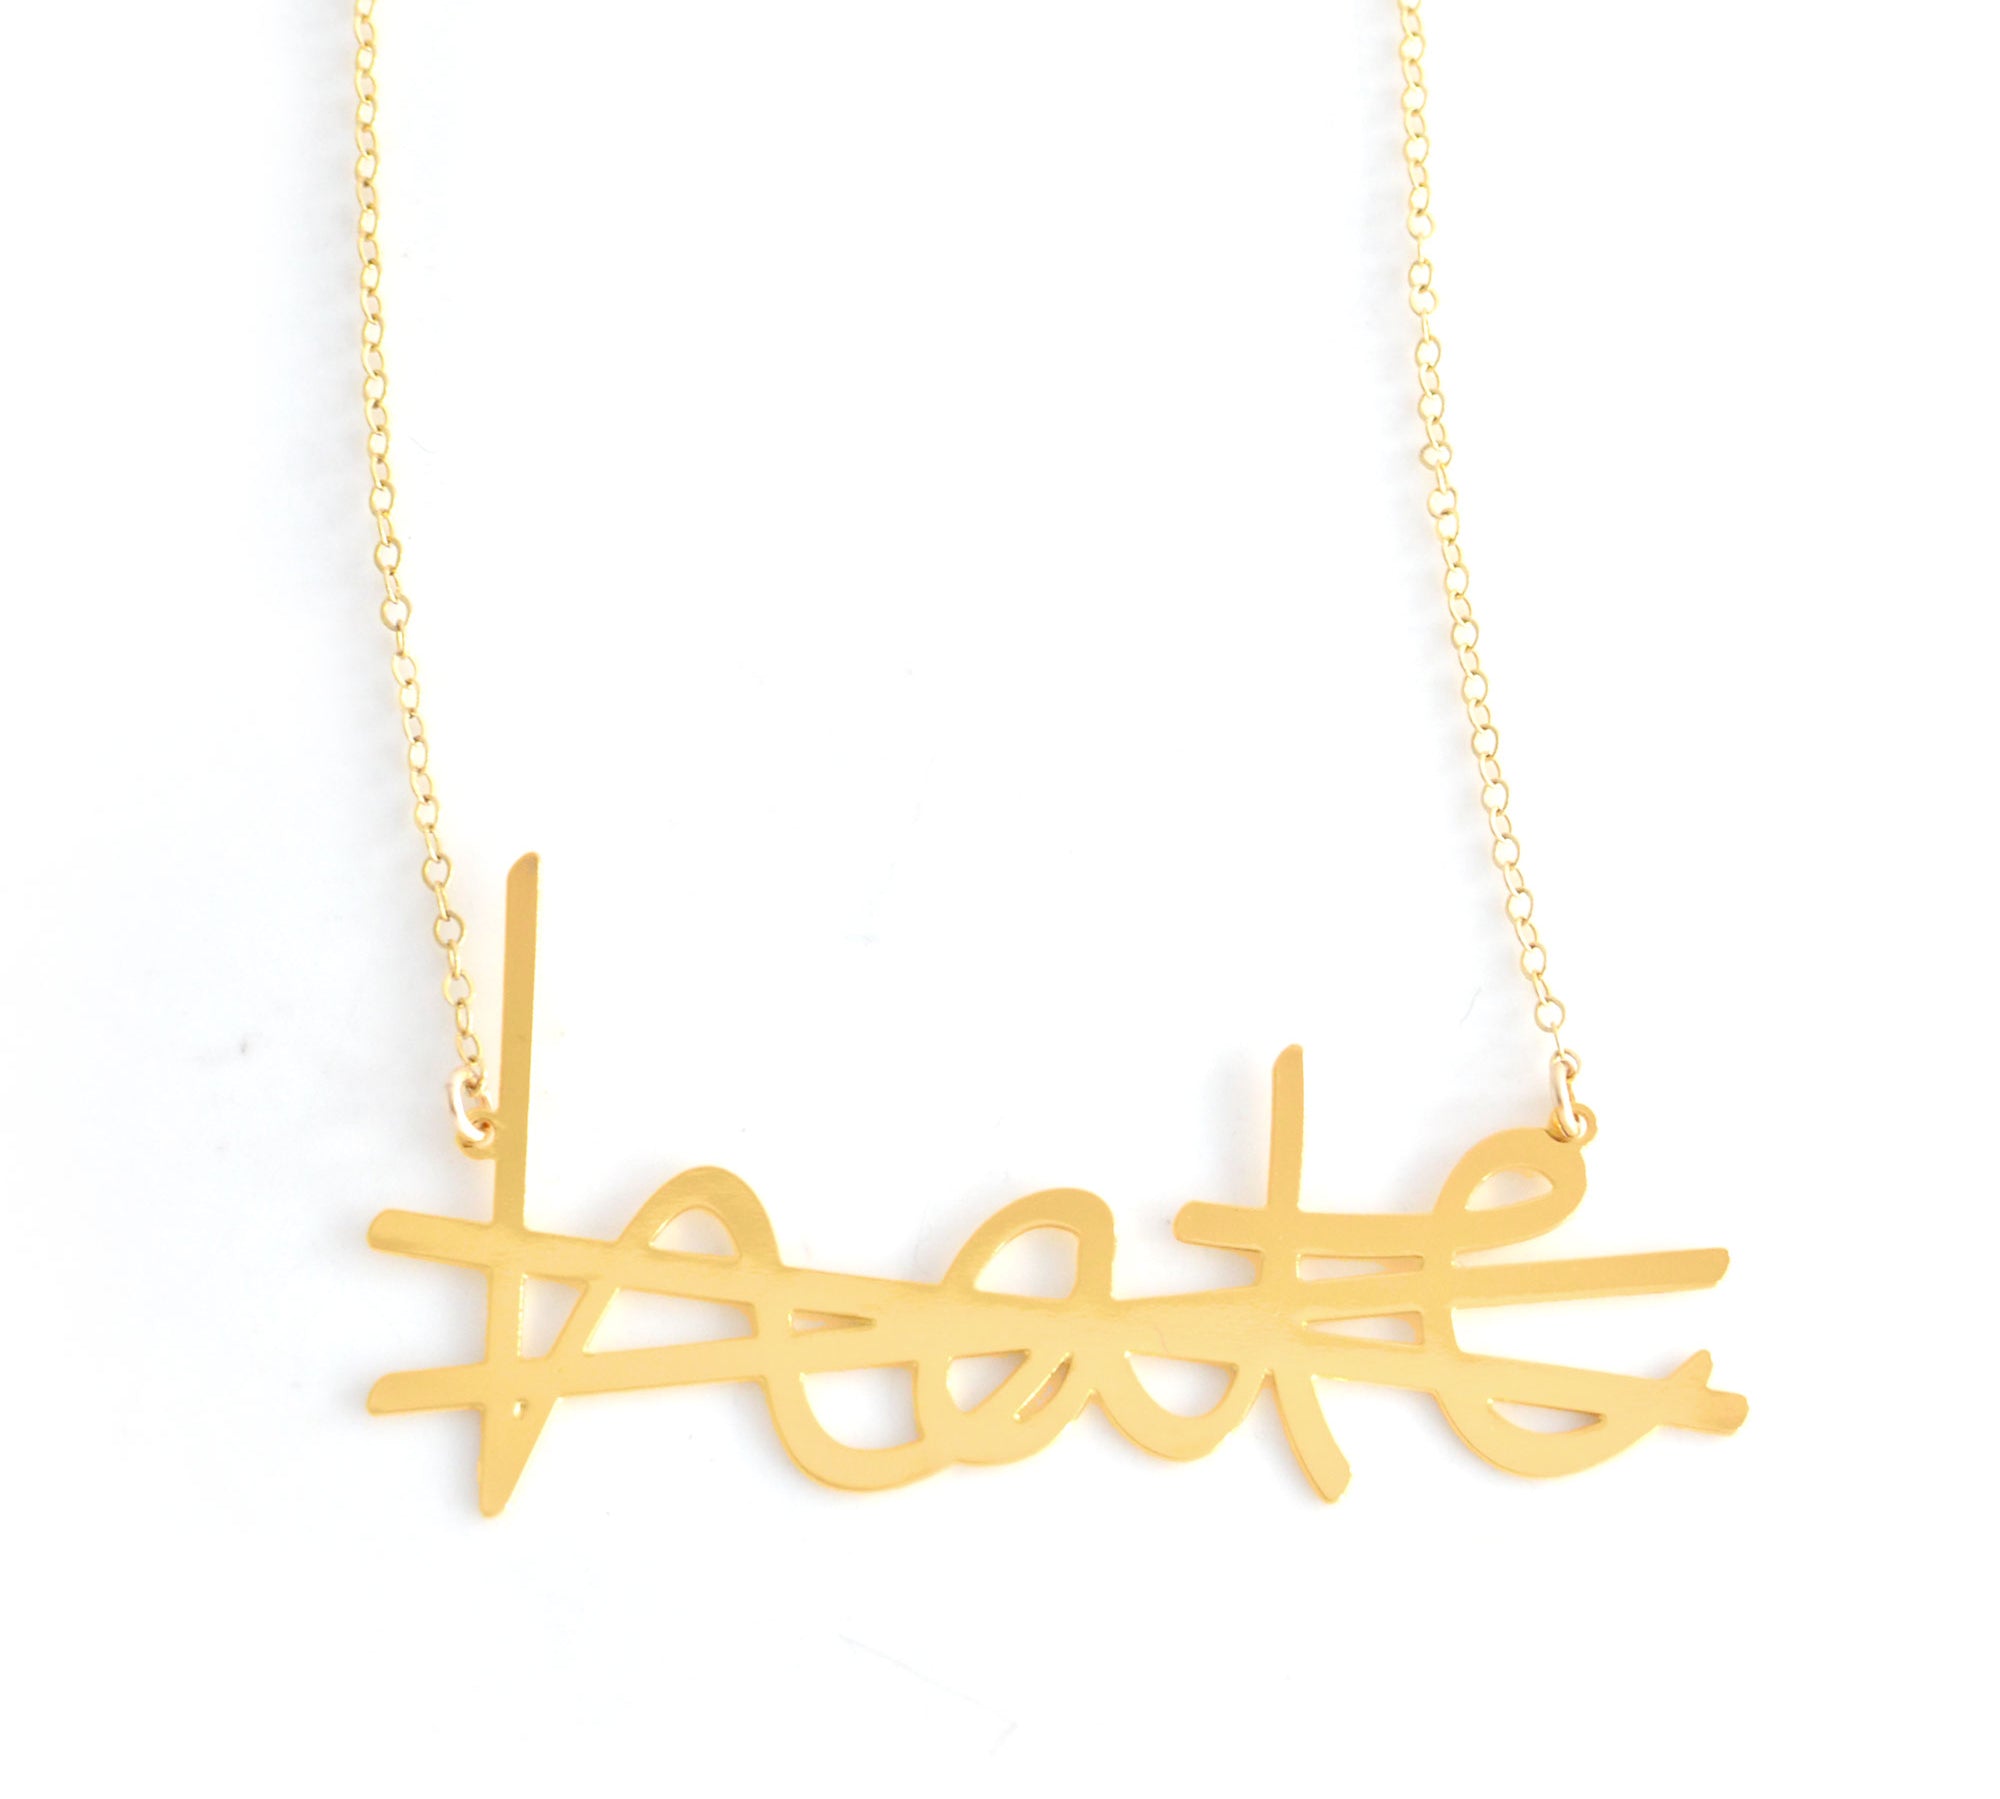 No More Hate Necklace - High Quality, Affordable, Hand Written, Empowering, Self Love, Mantra Word Necklace - Available in Gold and Silver - Small and Large Sizes - Made in USA - Brevity Jewelry